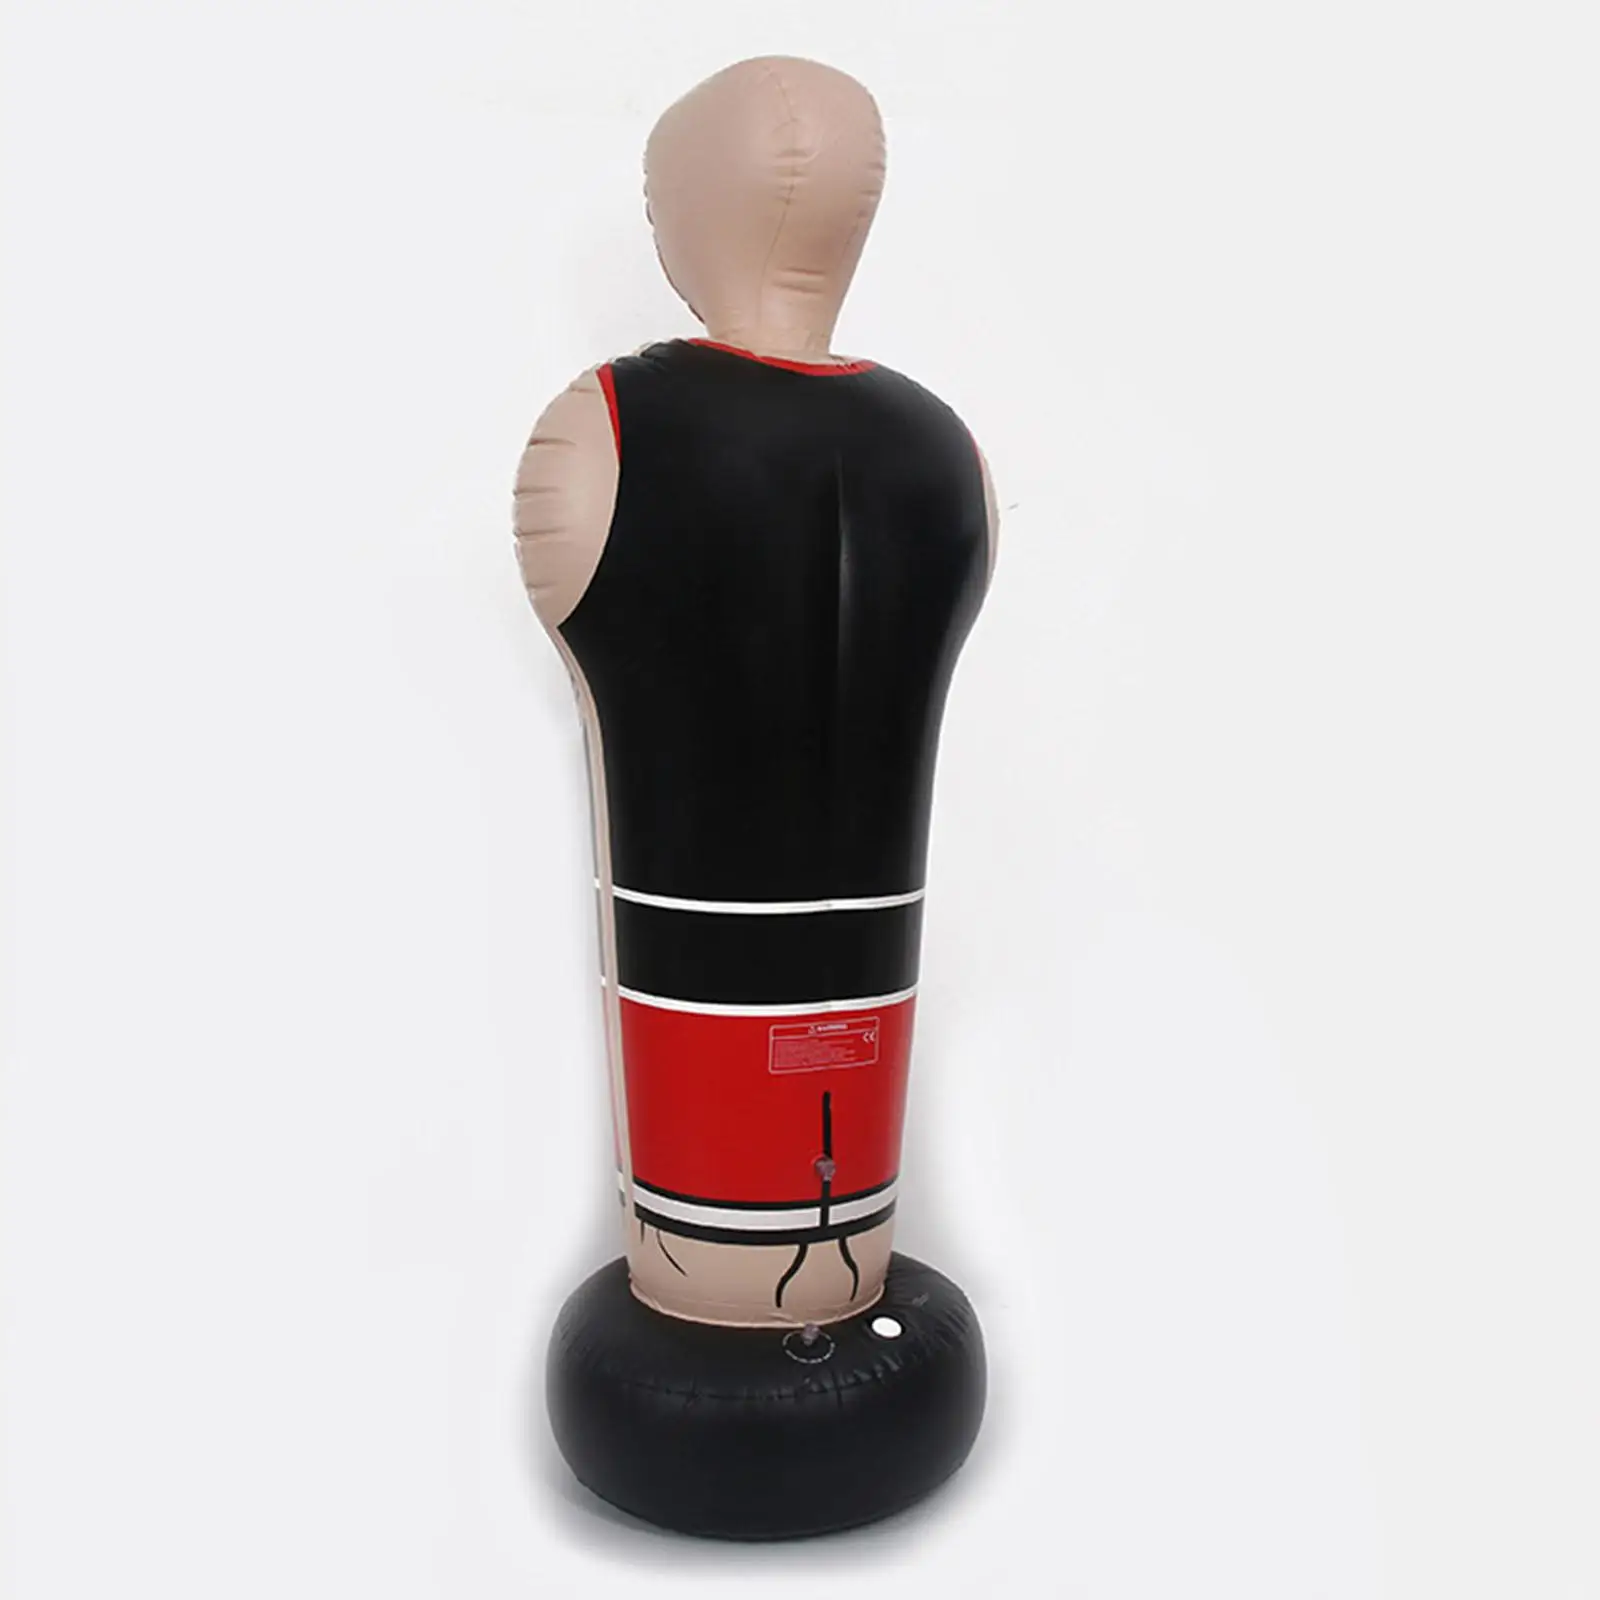 Inflatable Punching Bag Boxing Target Bag Inflatable Boxing Bag for Muay Thai Practice Indoors Outdoors Mma Exercise Equipment